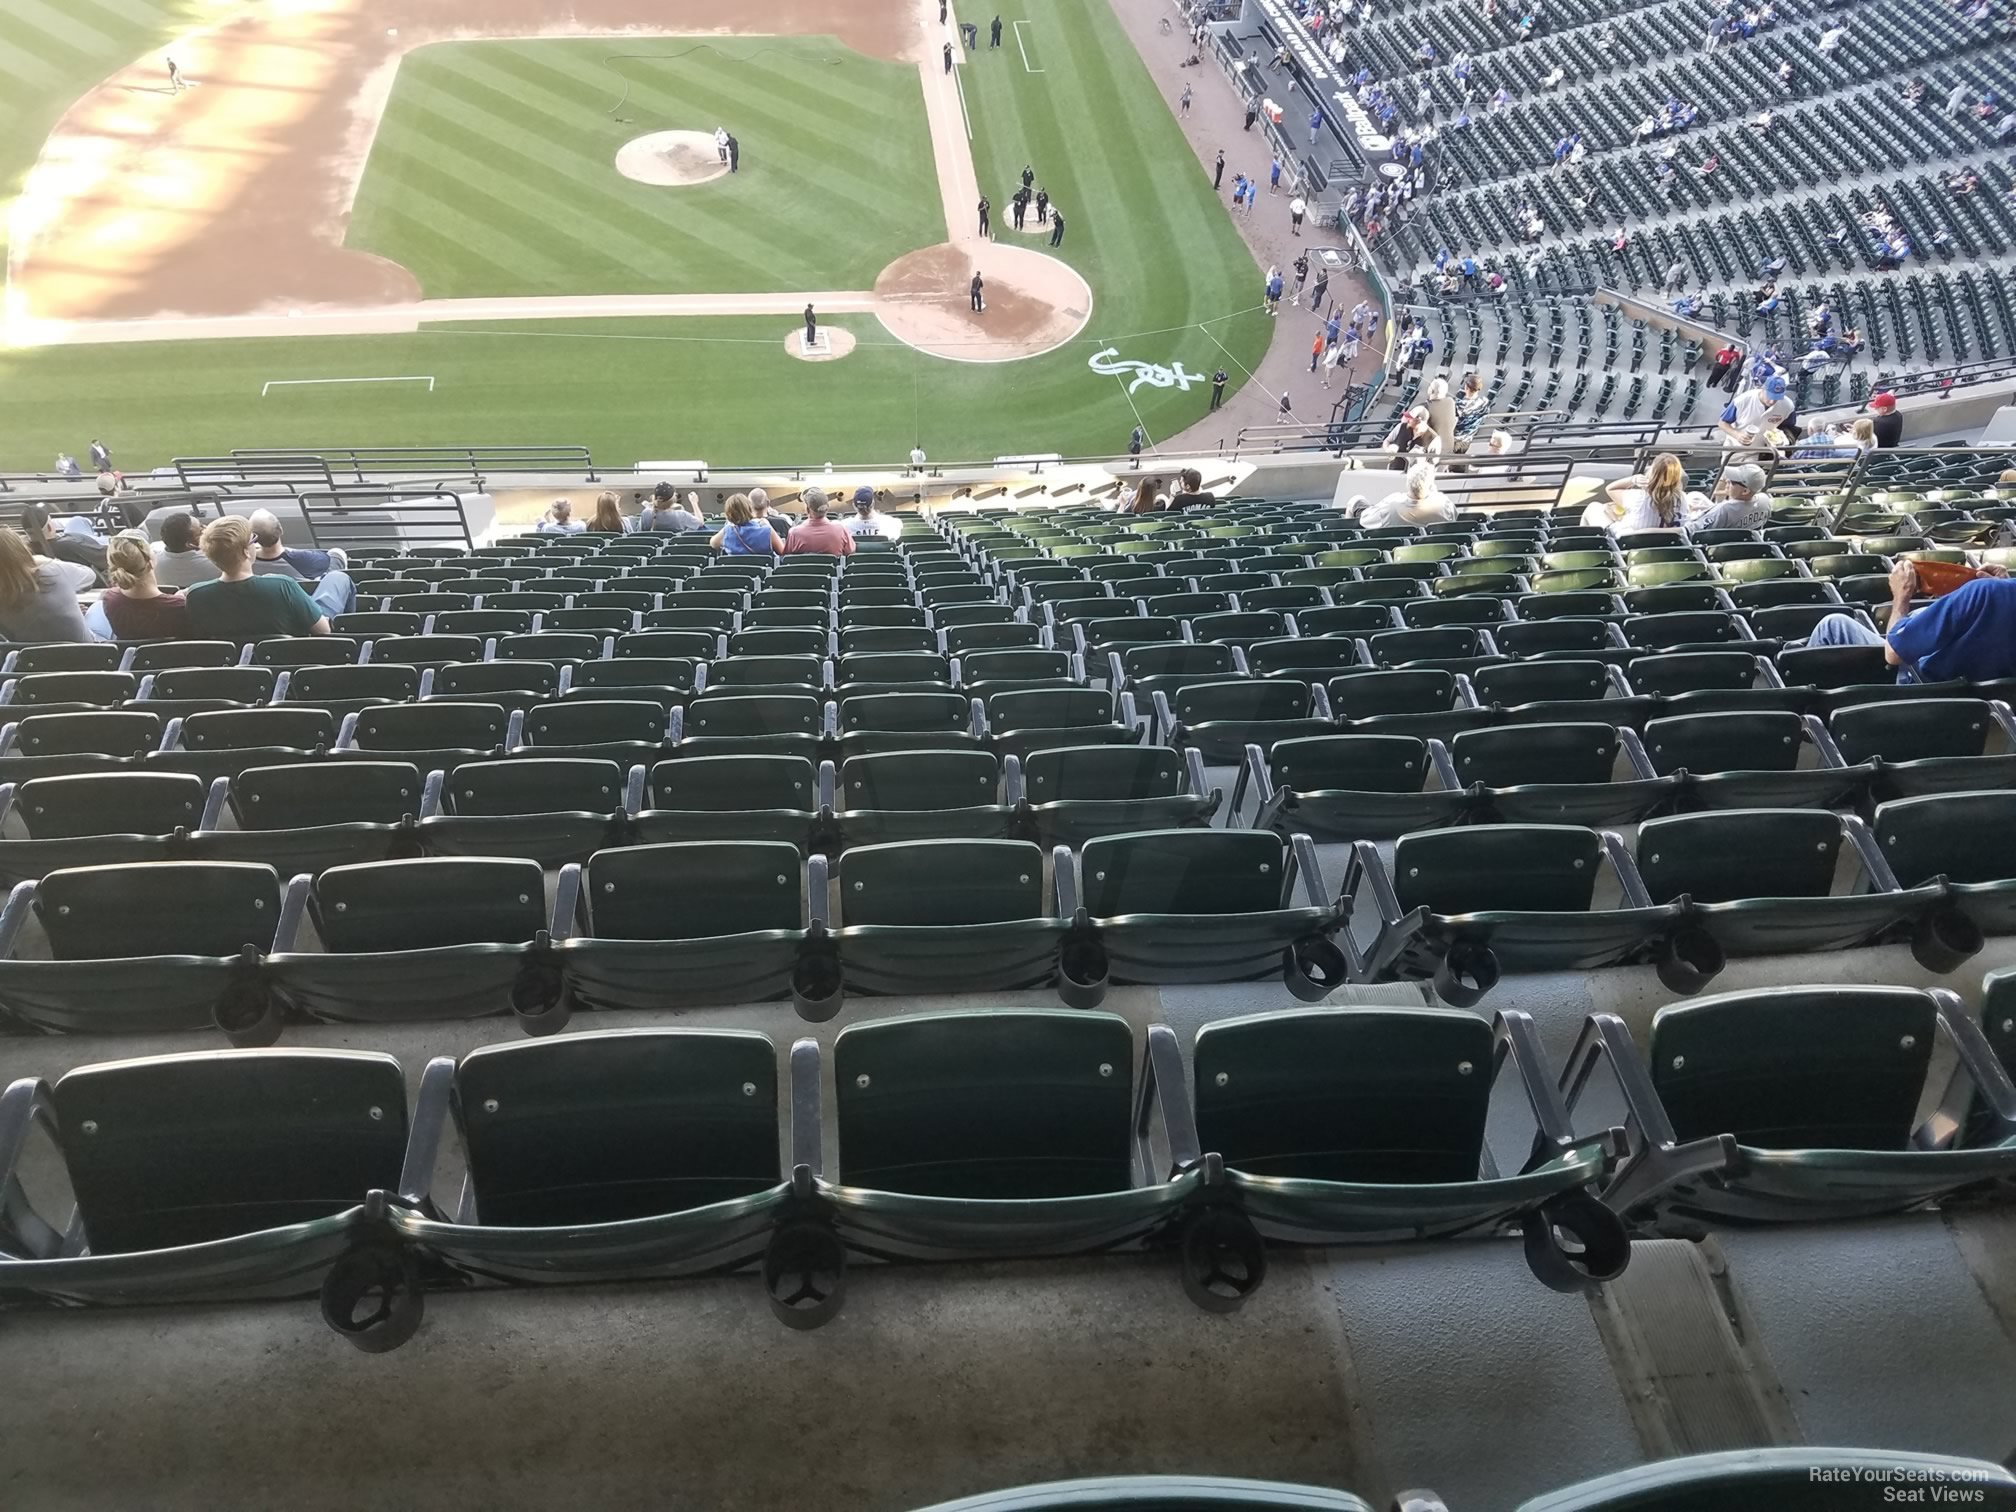 section 537 seats